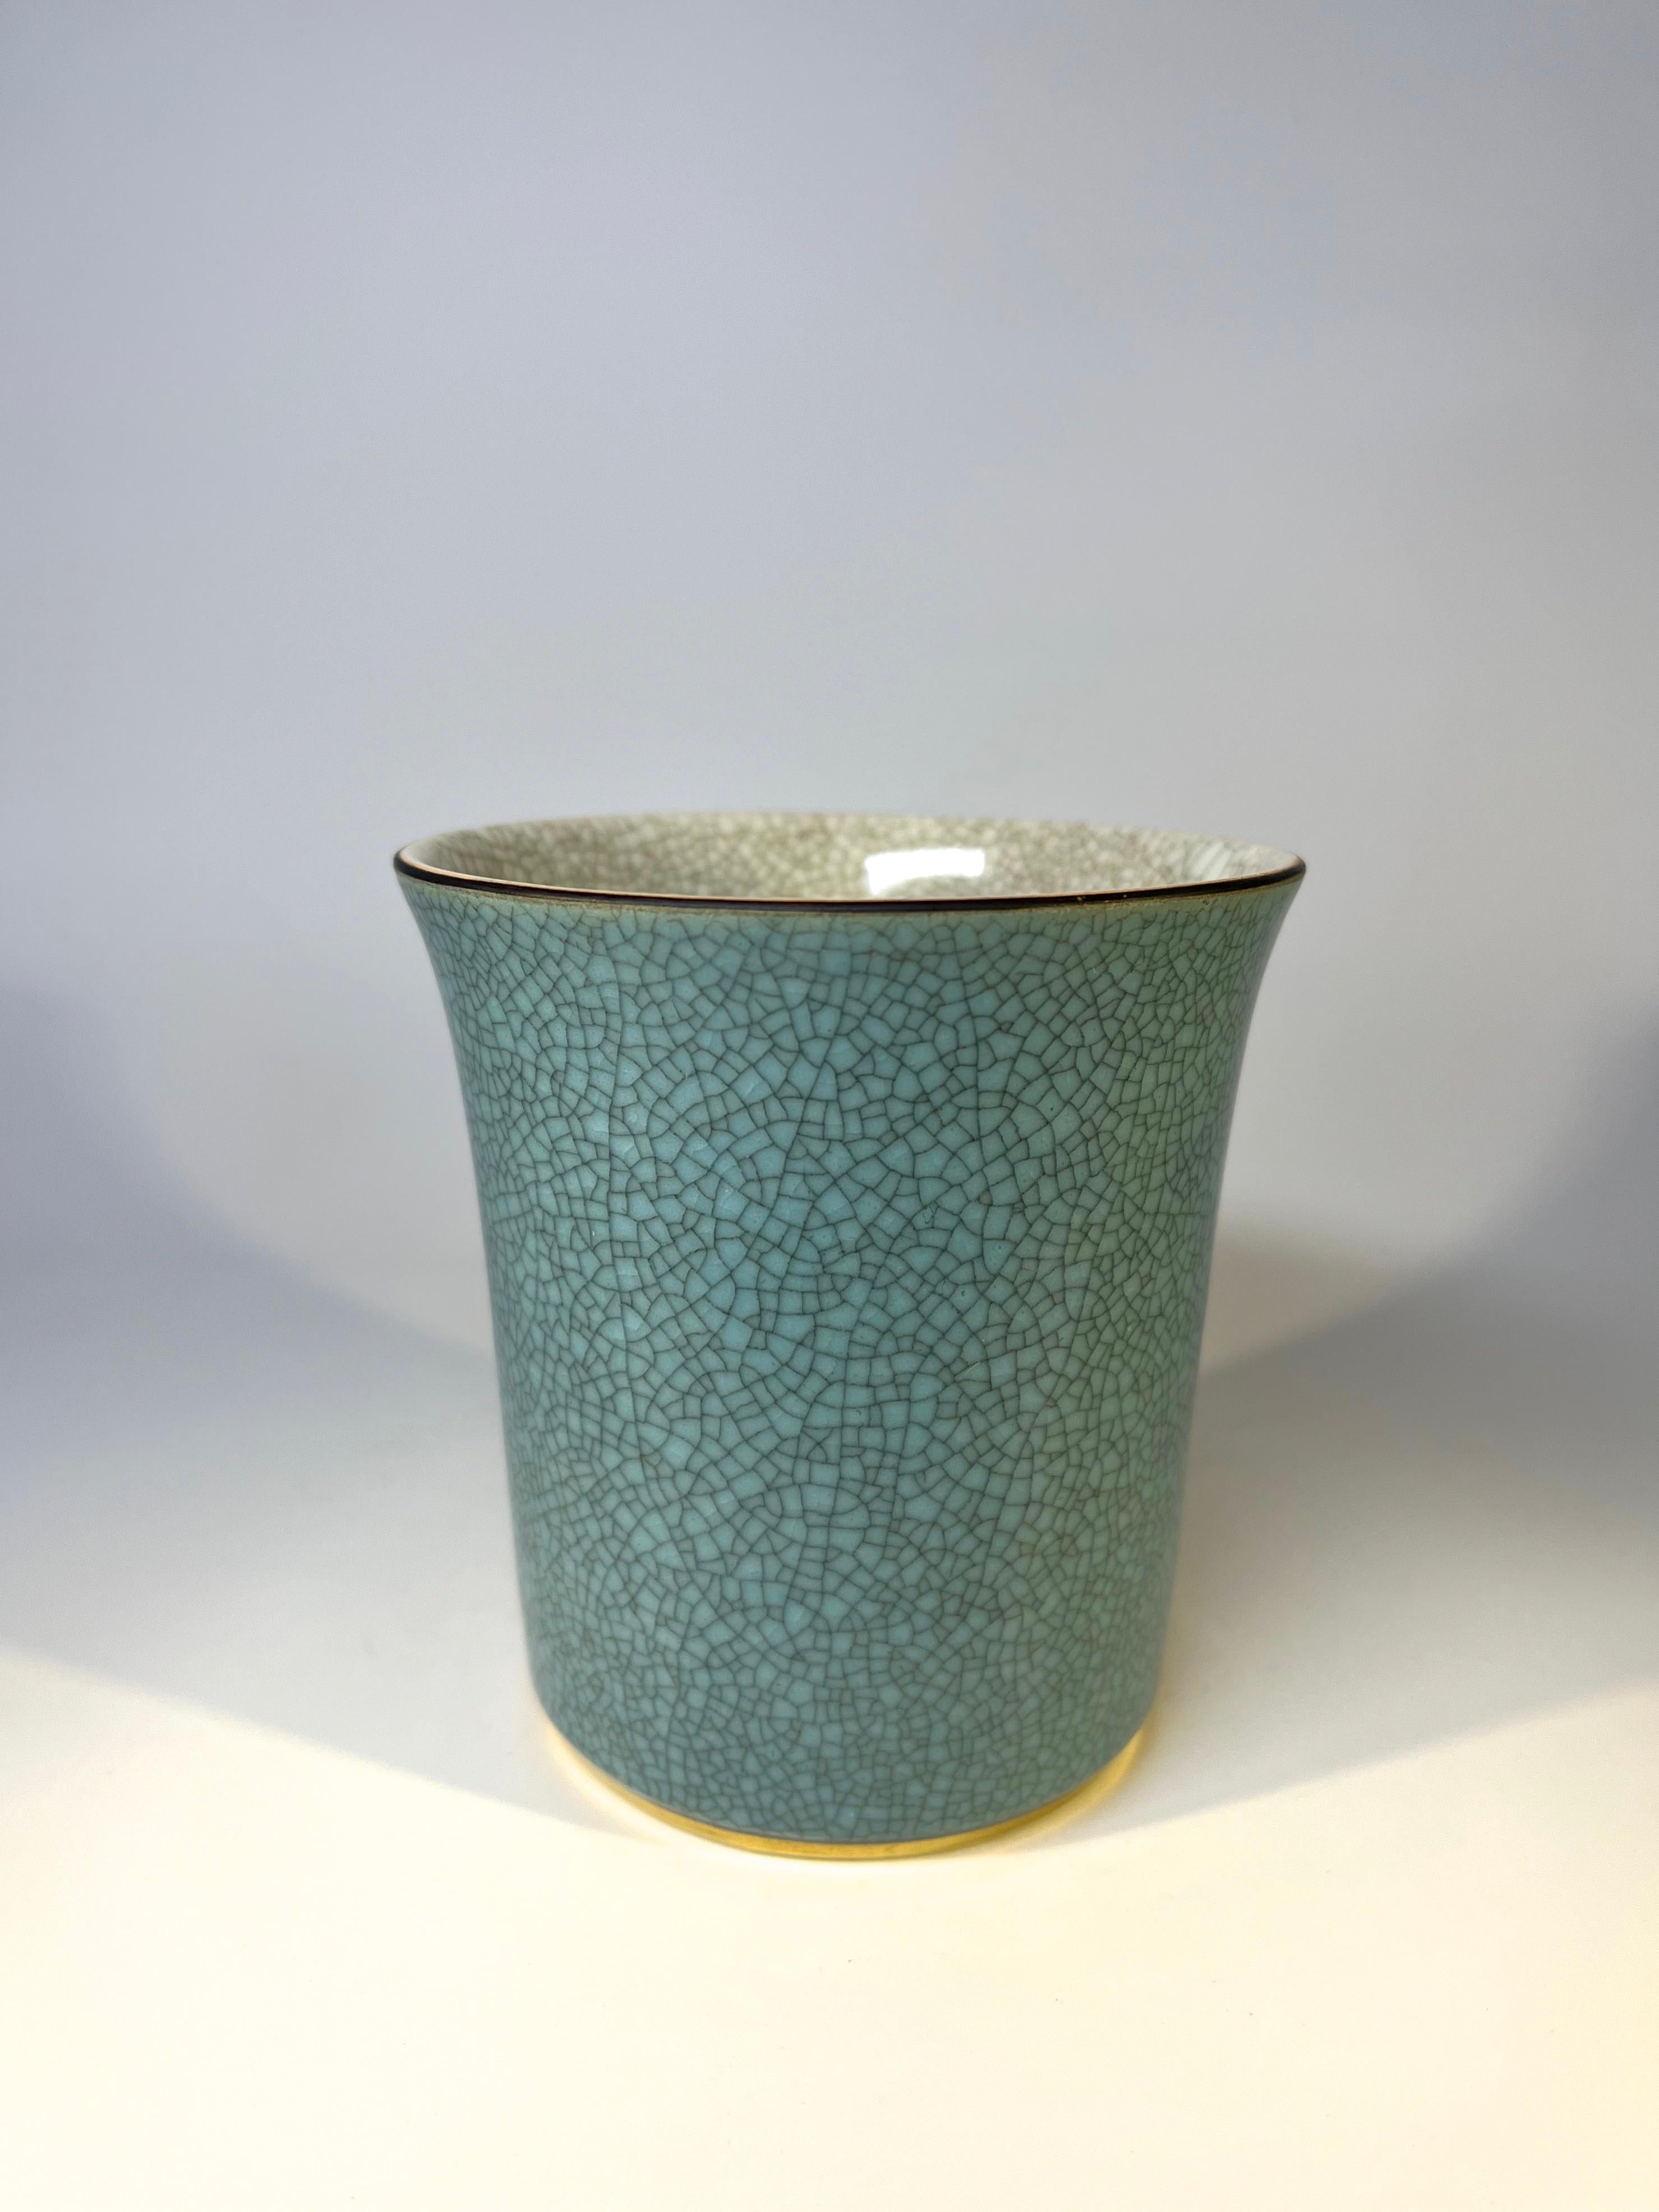 Thorkild Olsen for Royal Copenhagen, Denmark, porcelain crackle glaze tumbler pot
Turquoise crackle glaze with gilded band to base. Pale grey crackle interior
Circa 1963
Stamped and numbered 3613
Height 4 inch, Diameter 3.5 inch
In very good